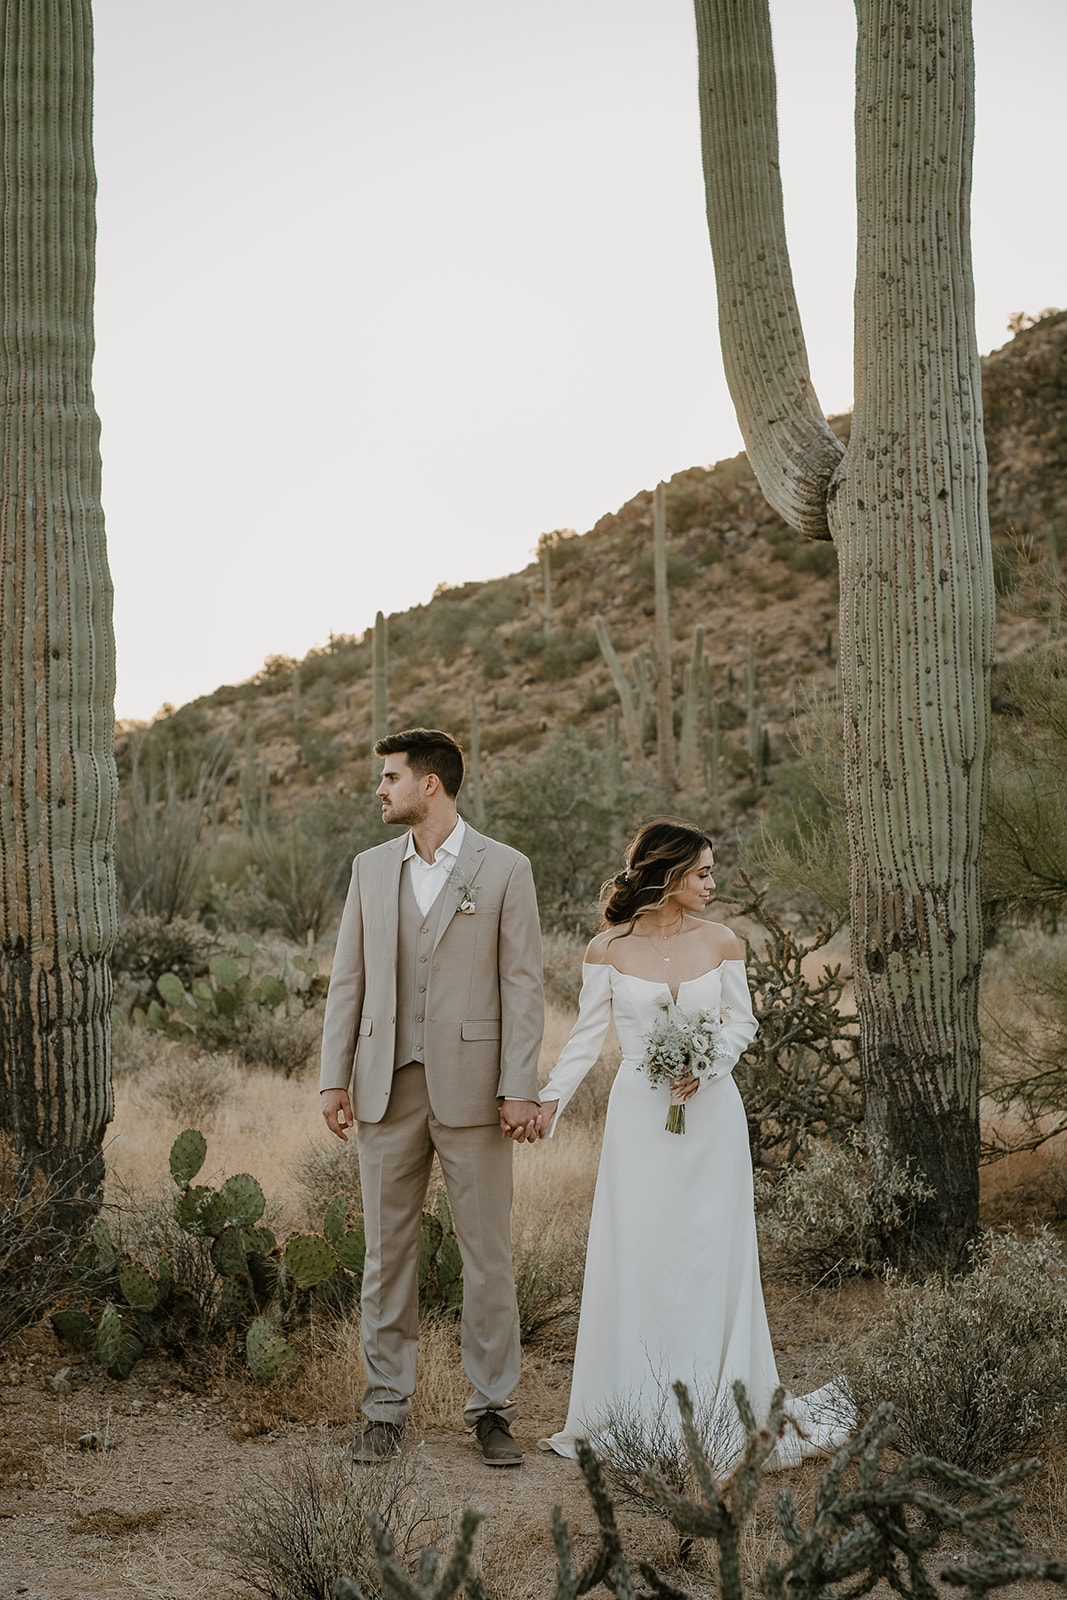 Man and Woman holding hands in Saguaro National Park